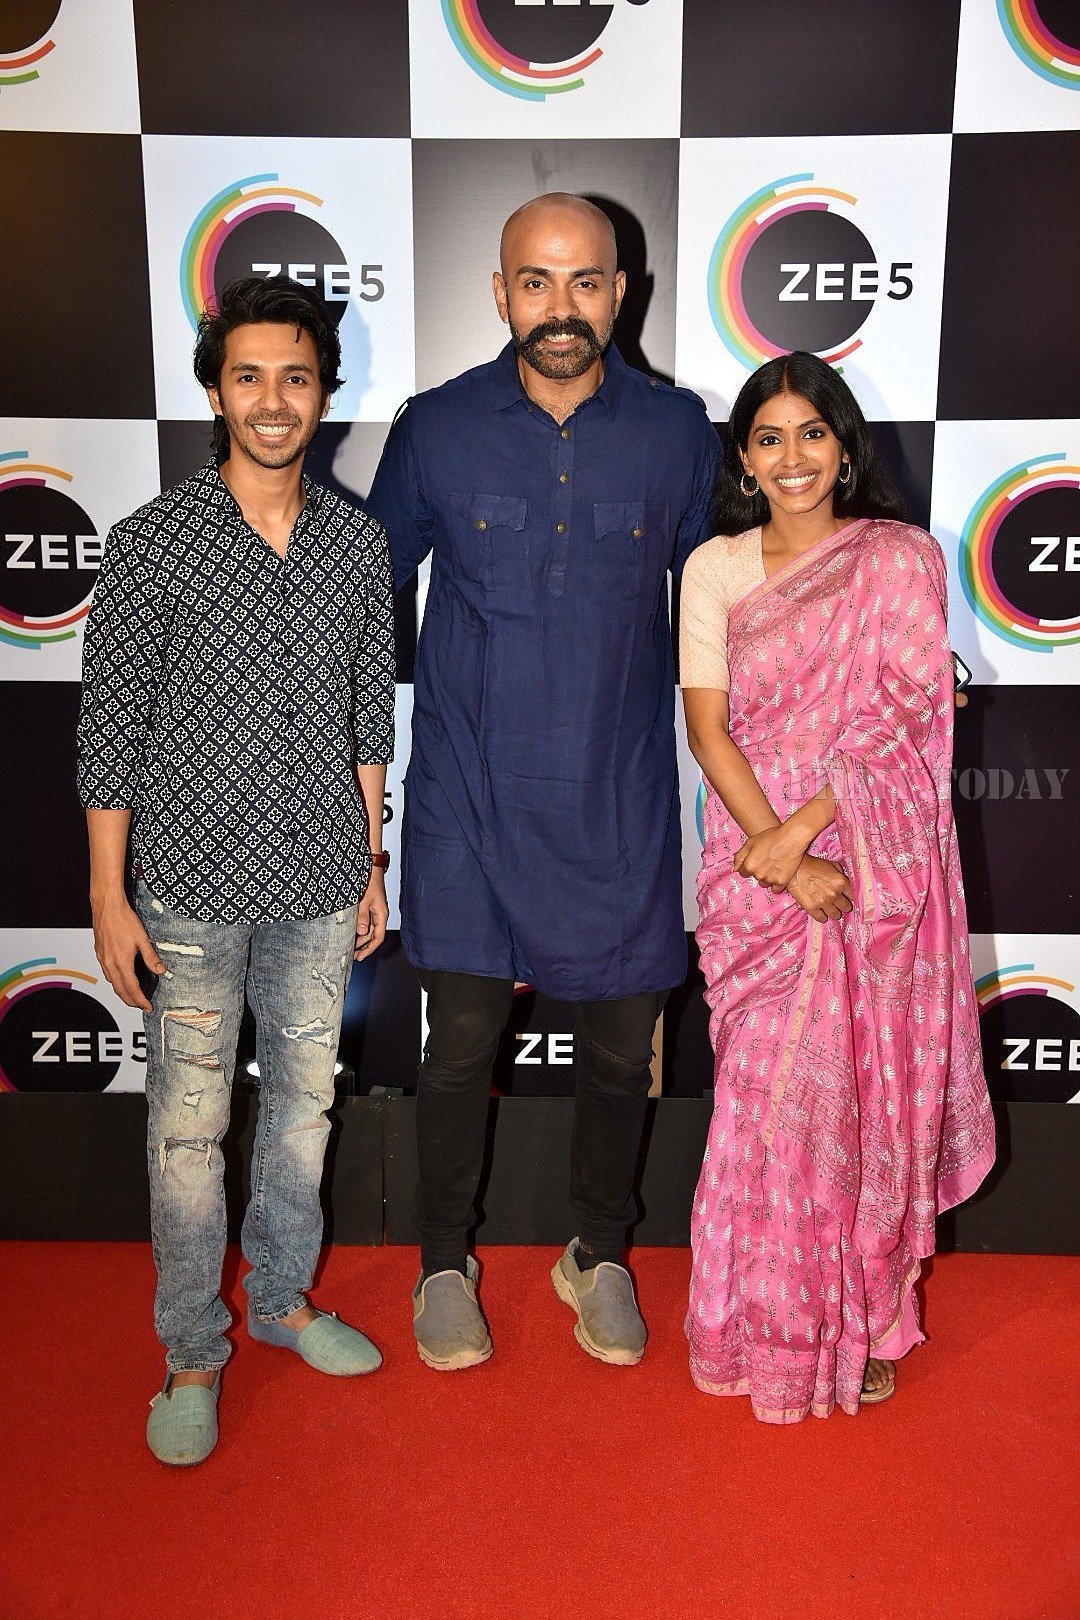 Photos: Red Carpet Of 1 Year Anniversary Of Zee5 App | Picture 1627522